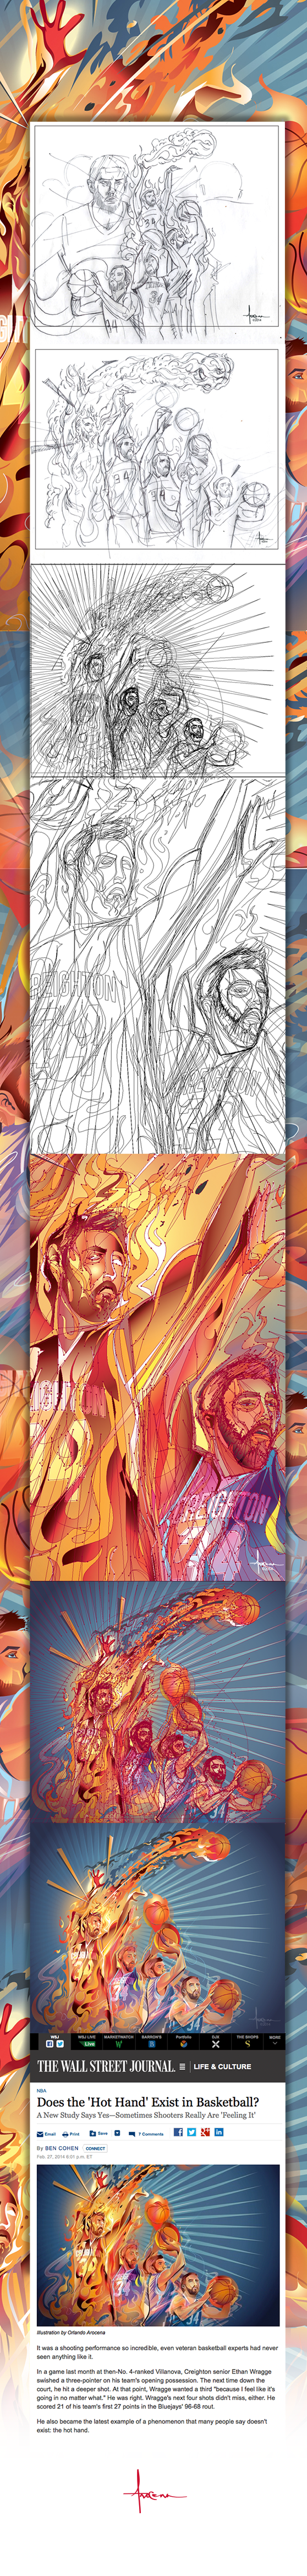 vector Illustrator orlando-arocena wall-street-journal wsj NBS basketball hot-hand fire Flames pop-deco colorful anchor-points sports